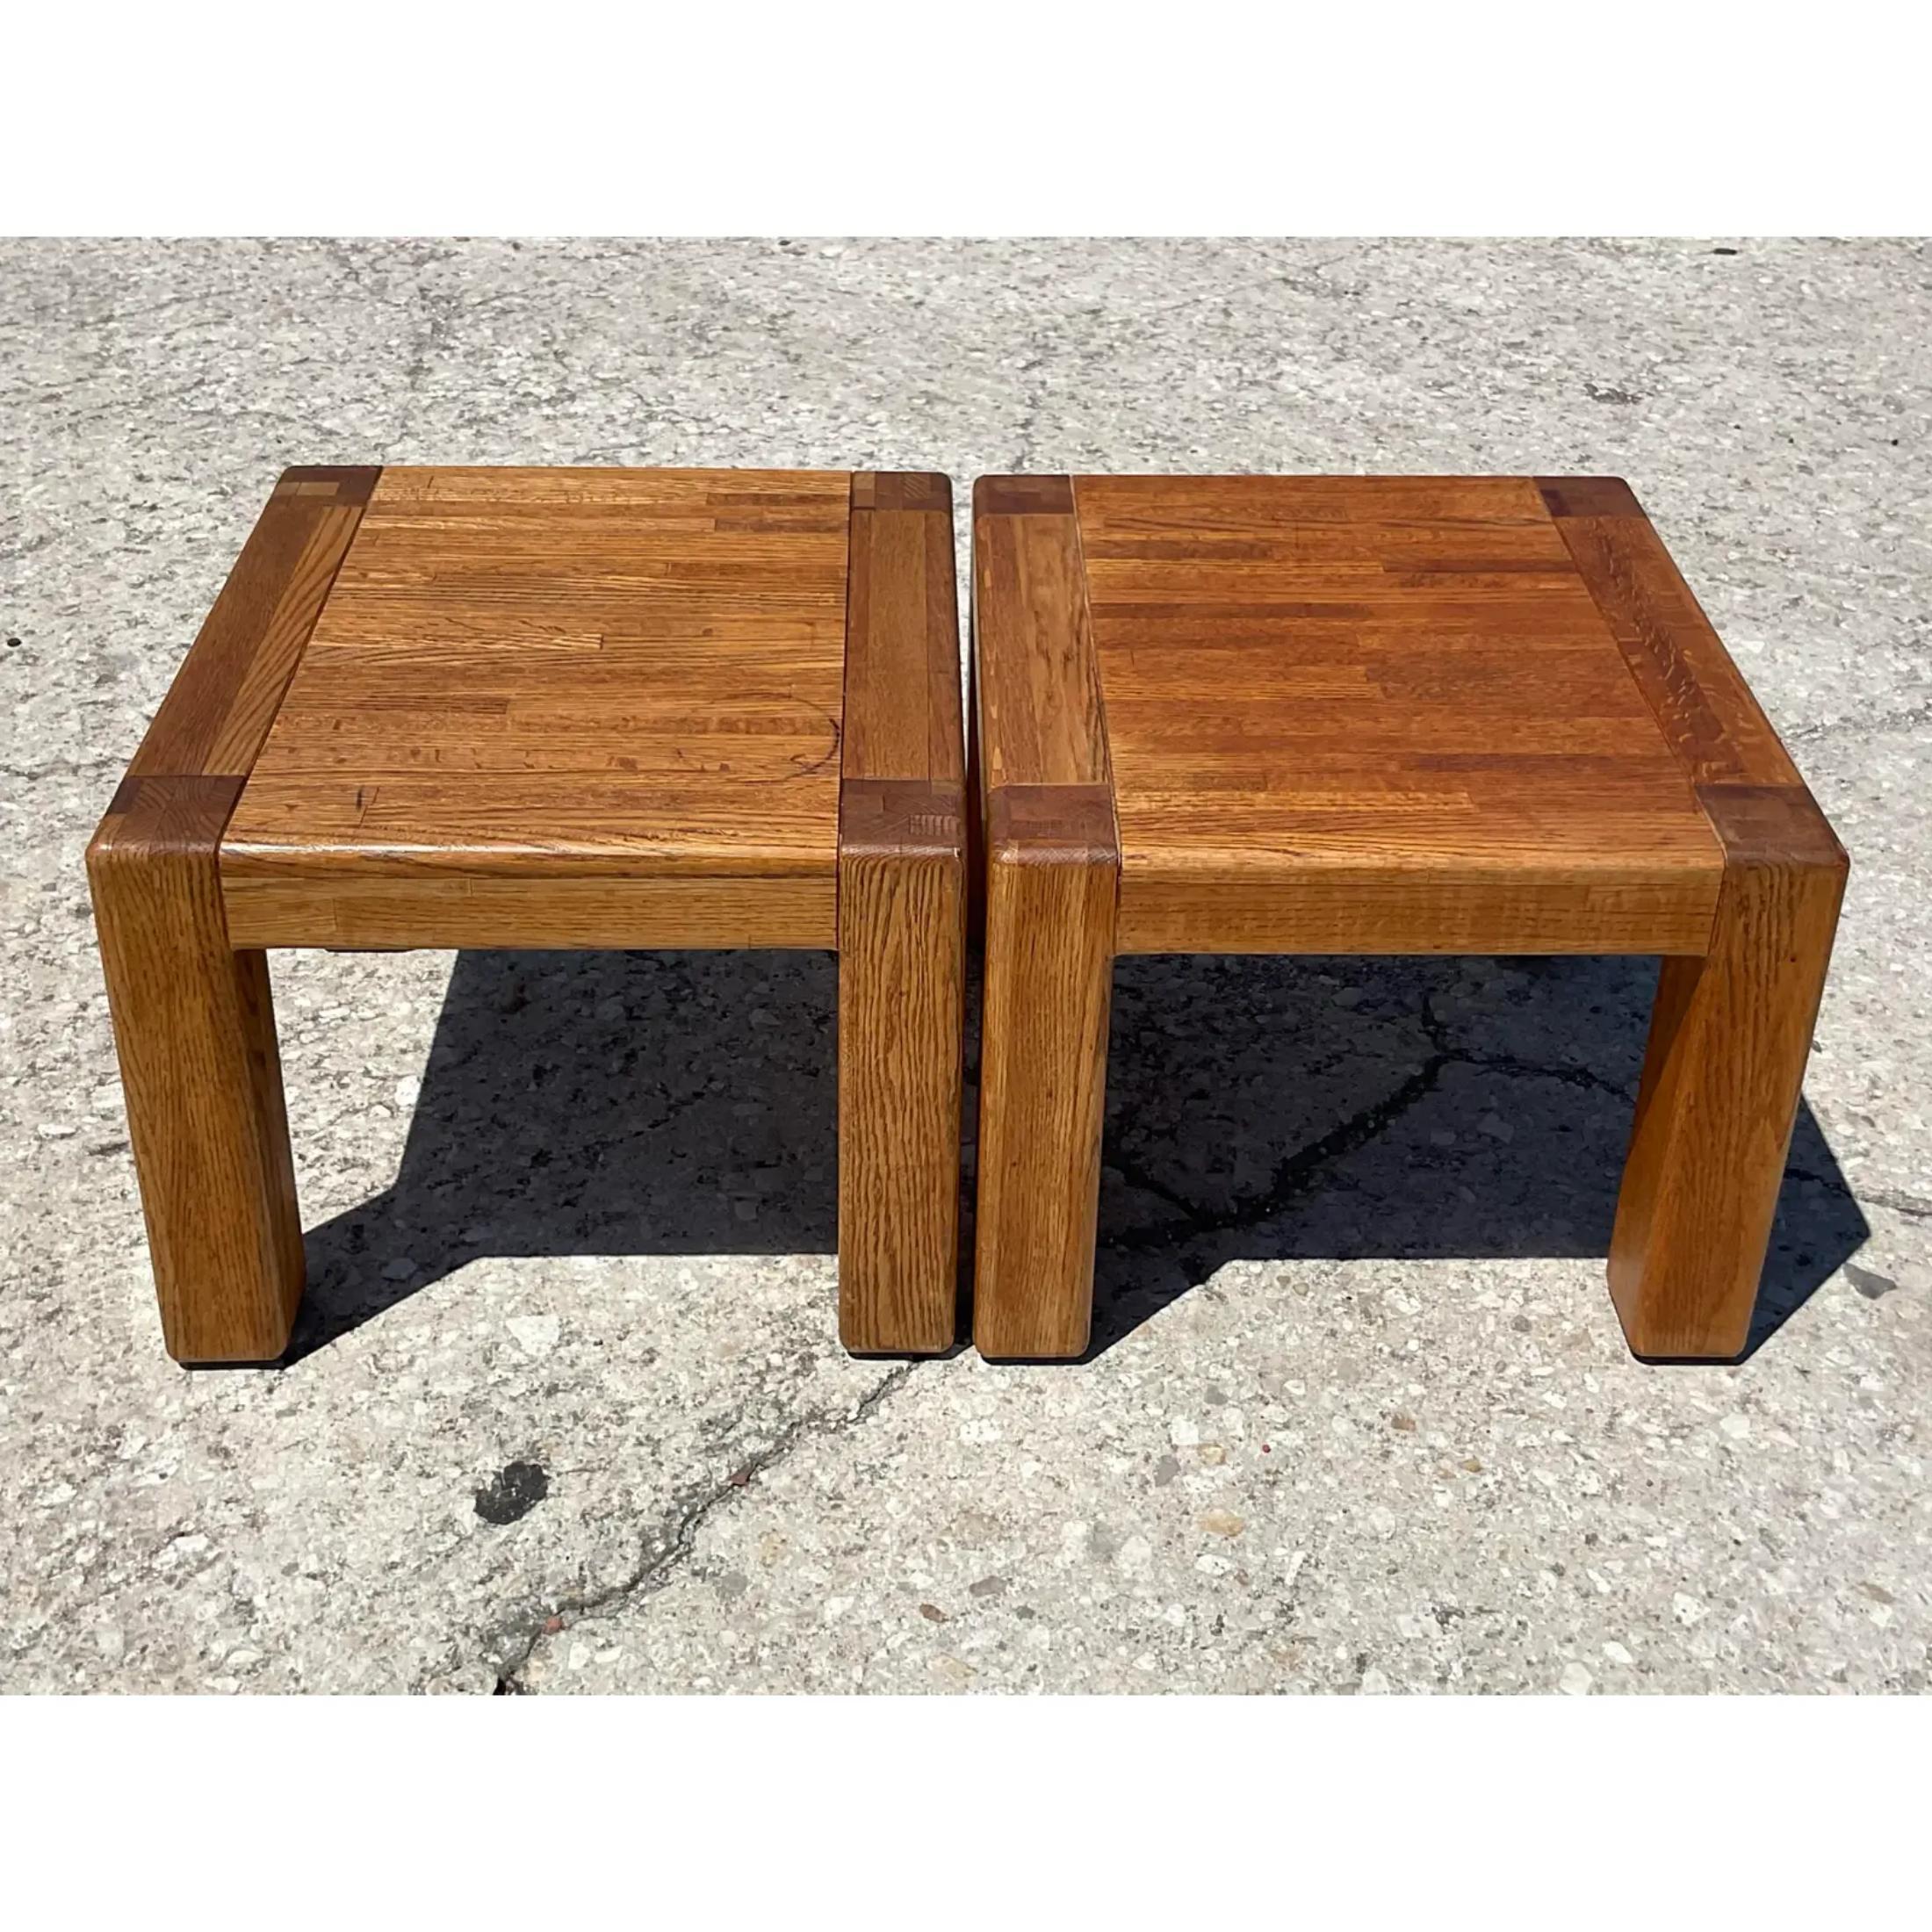 Fantastic pair of vintage Boho drinks tables. A simple and chic design constructed of a solid oak. Perfect as low side tables or movable drinks tables. Acquired from a Palm Beach estate